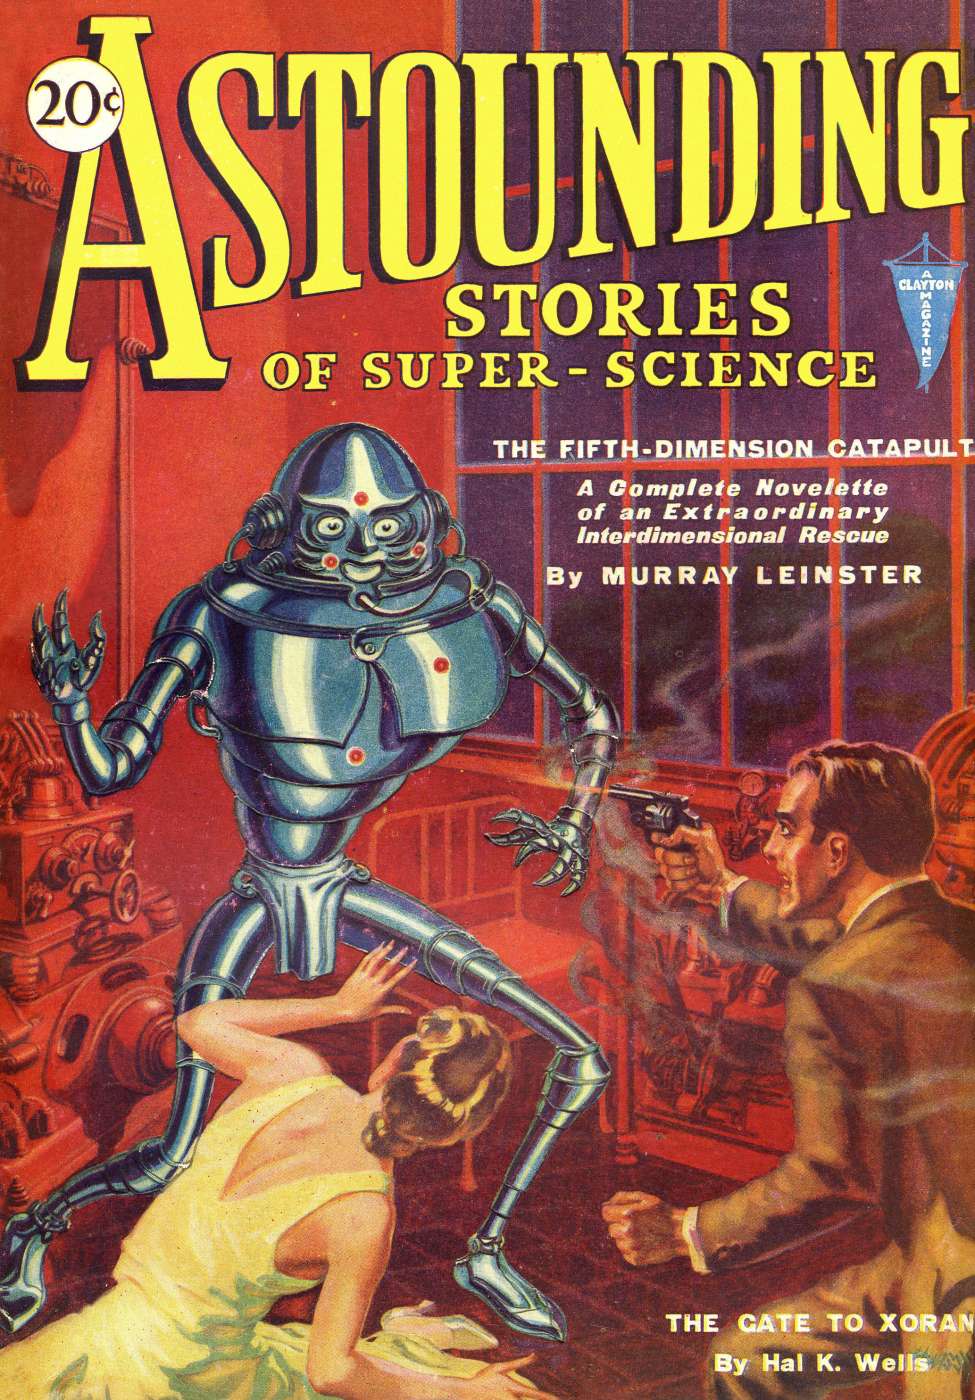 Comic Book Cover For Astounding v5 1 - The Fifth-Dimension Catapult - Murray Leinster